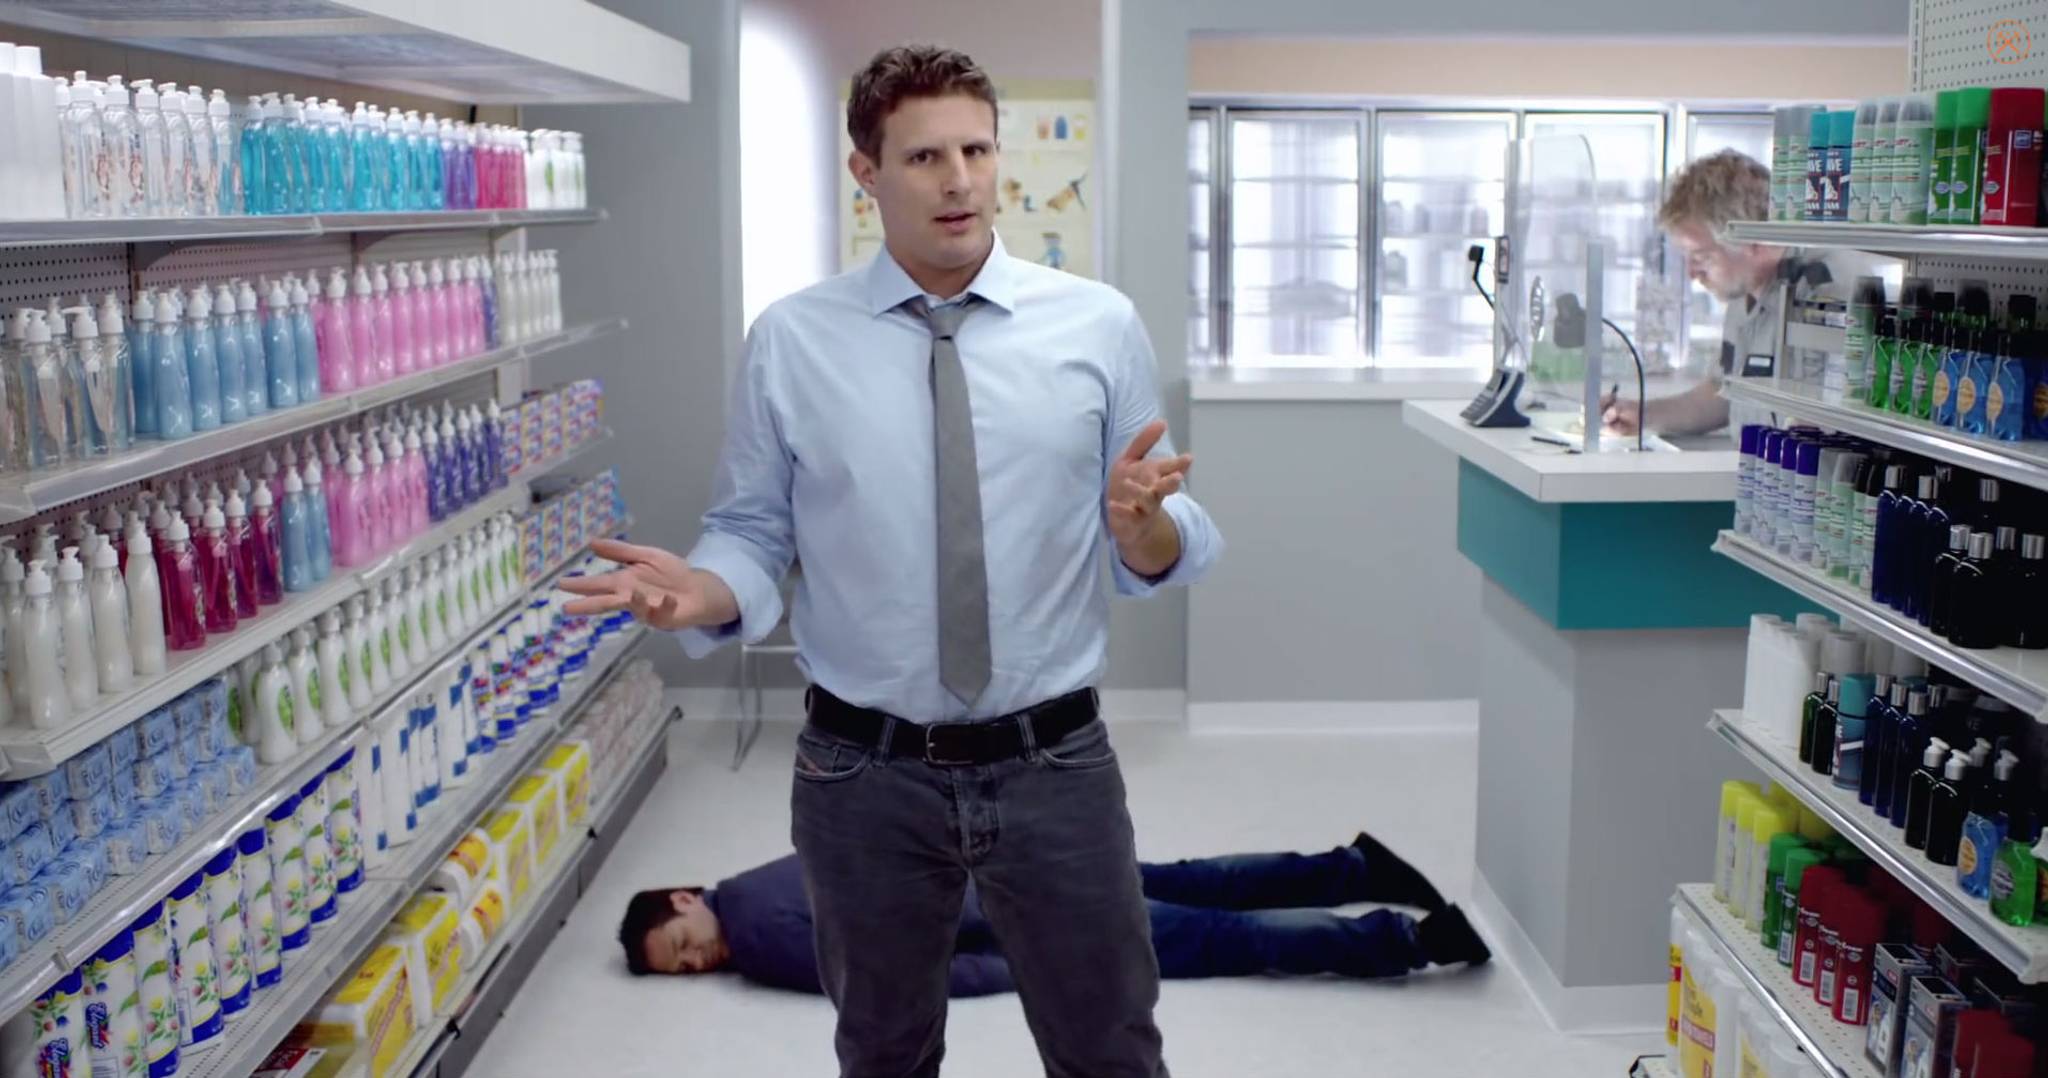 Dollar Shave Club gets TV adverts